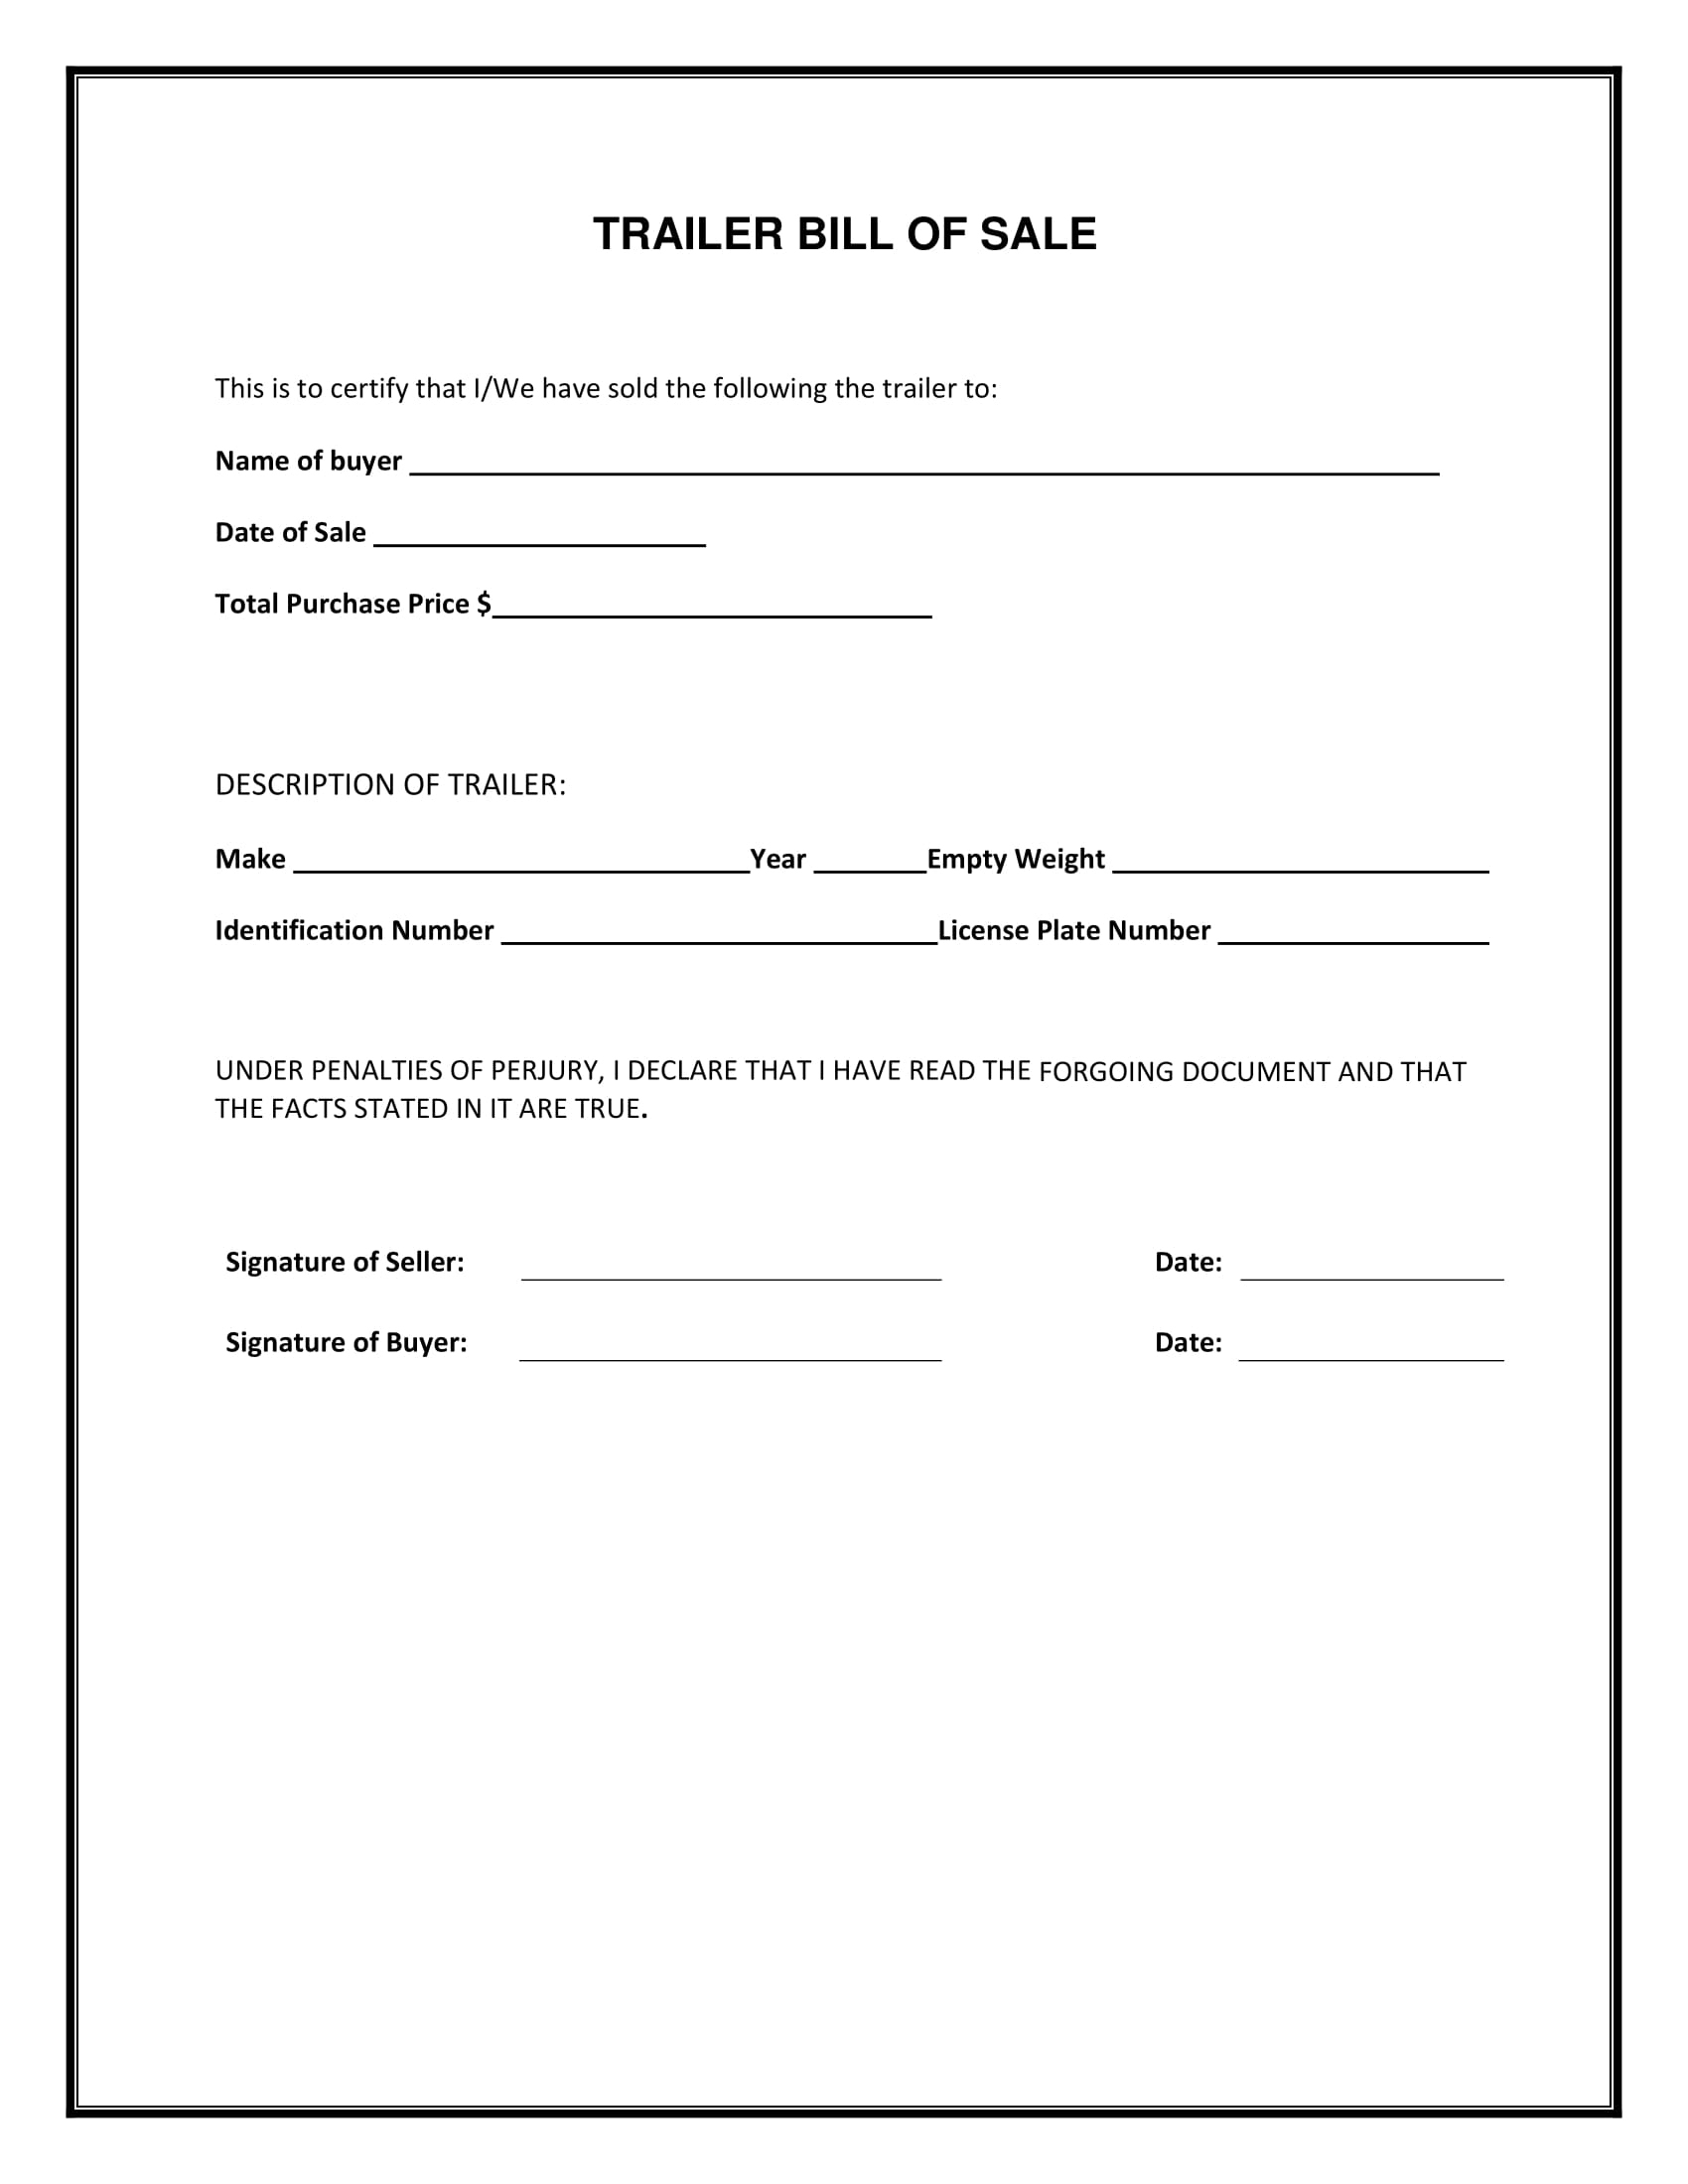 Free Florida Trailer Bill Of Sale Template | Fillable Forms - Free Printable Bill Of Sale For Boat Trailer